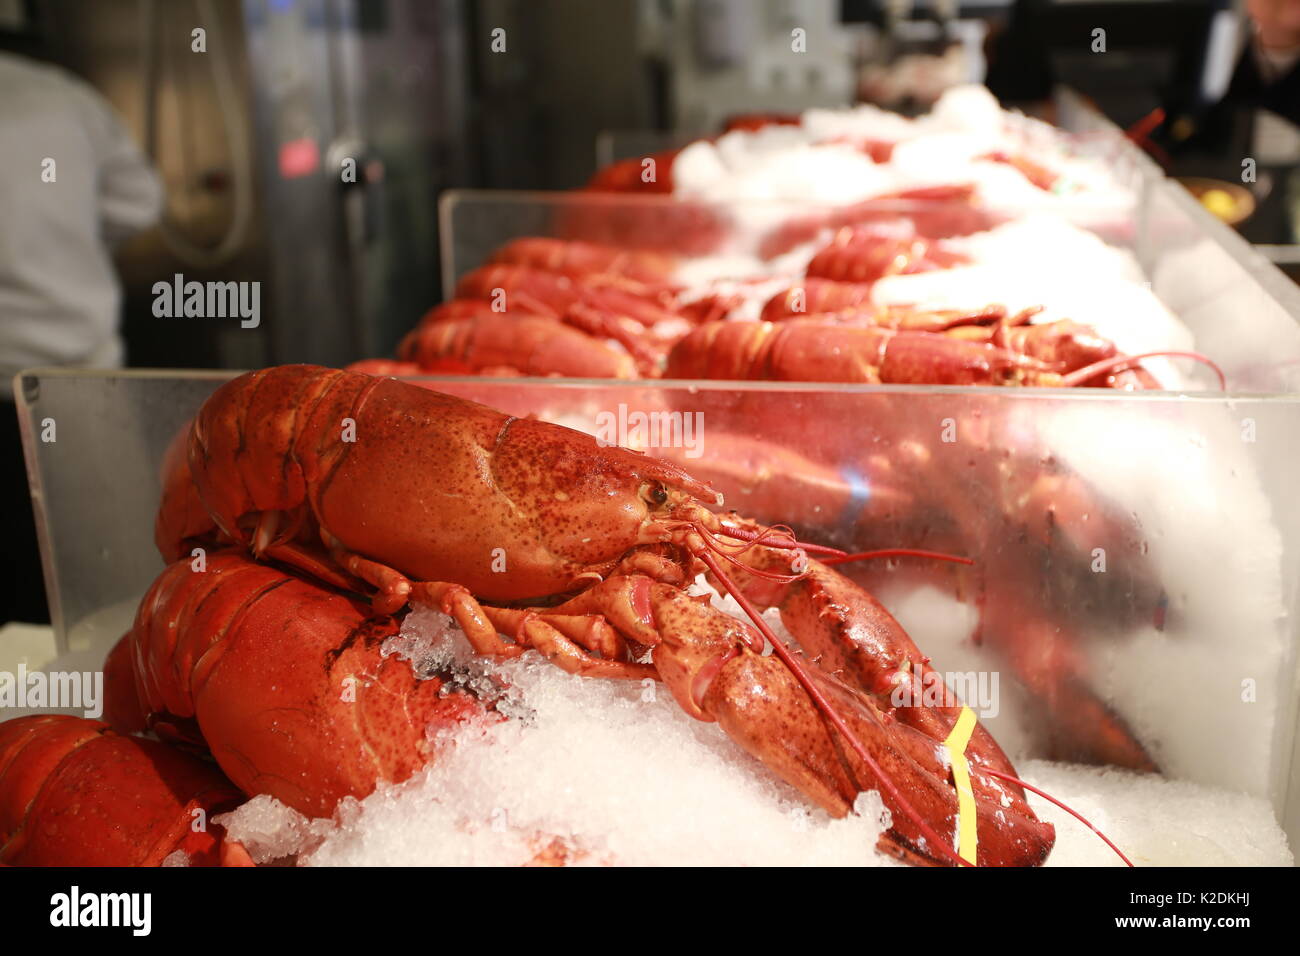 Lobster cooked in chelsa market Stock Photo